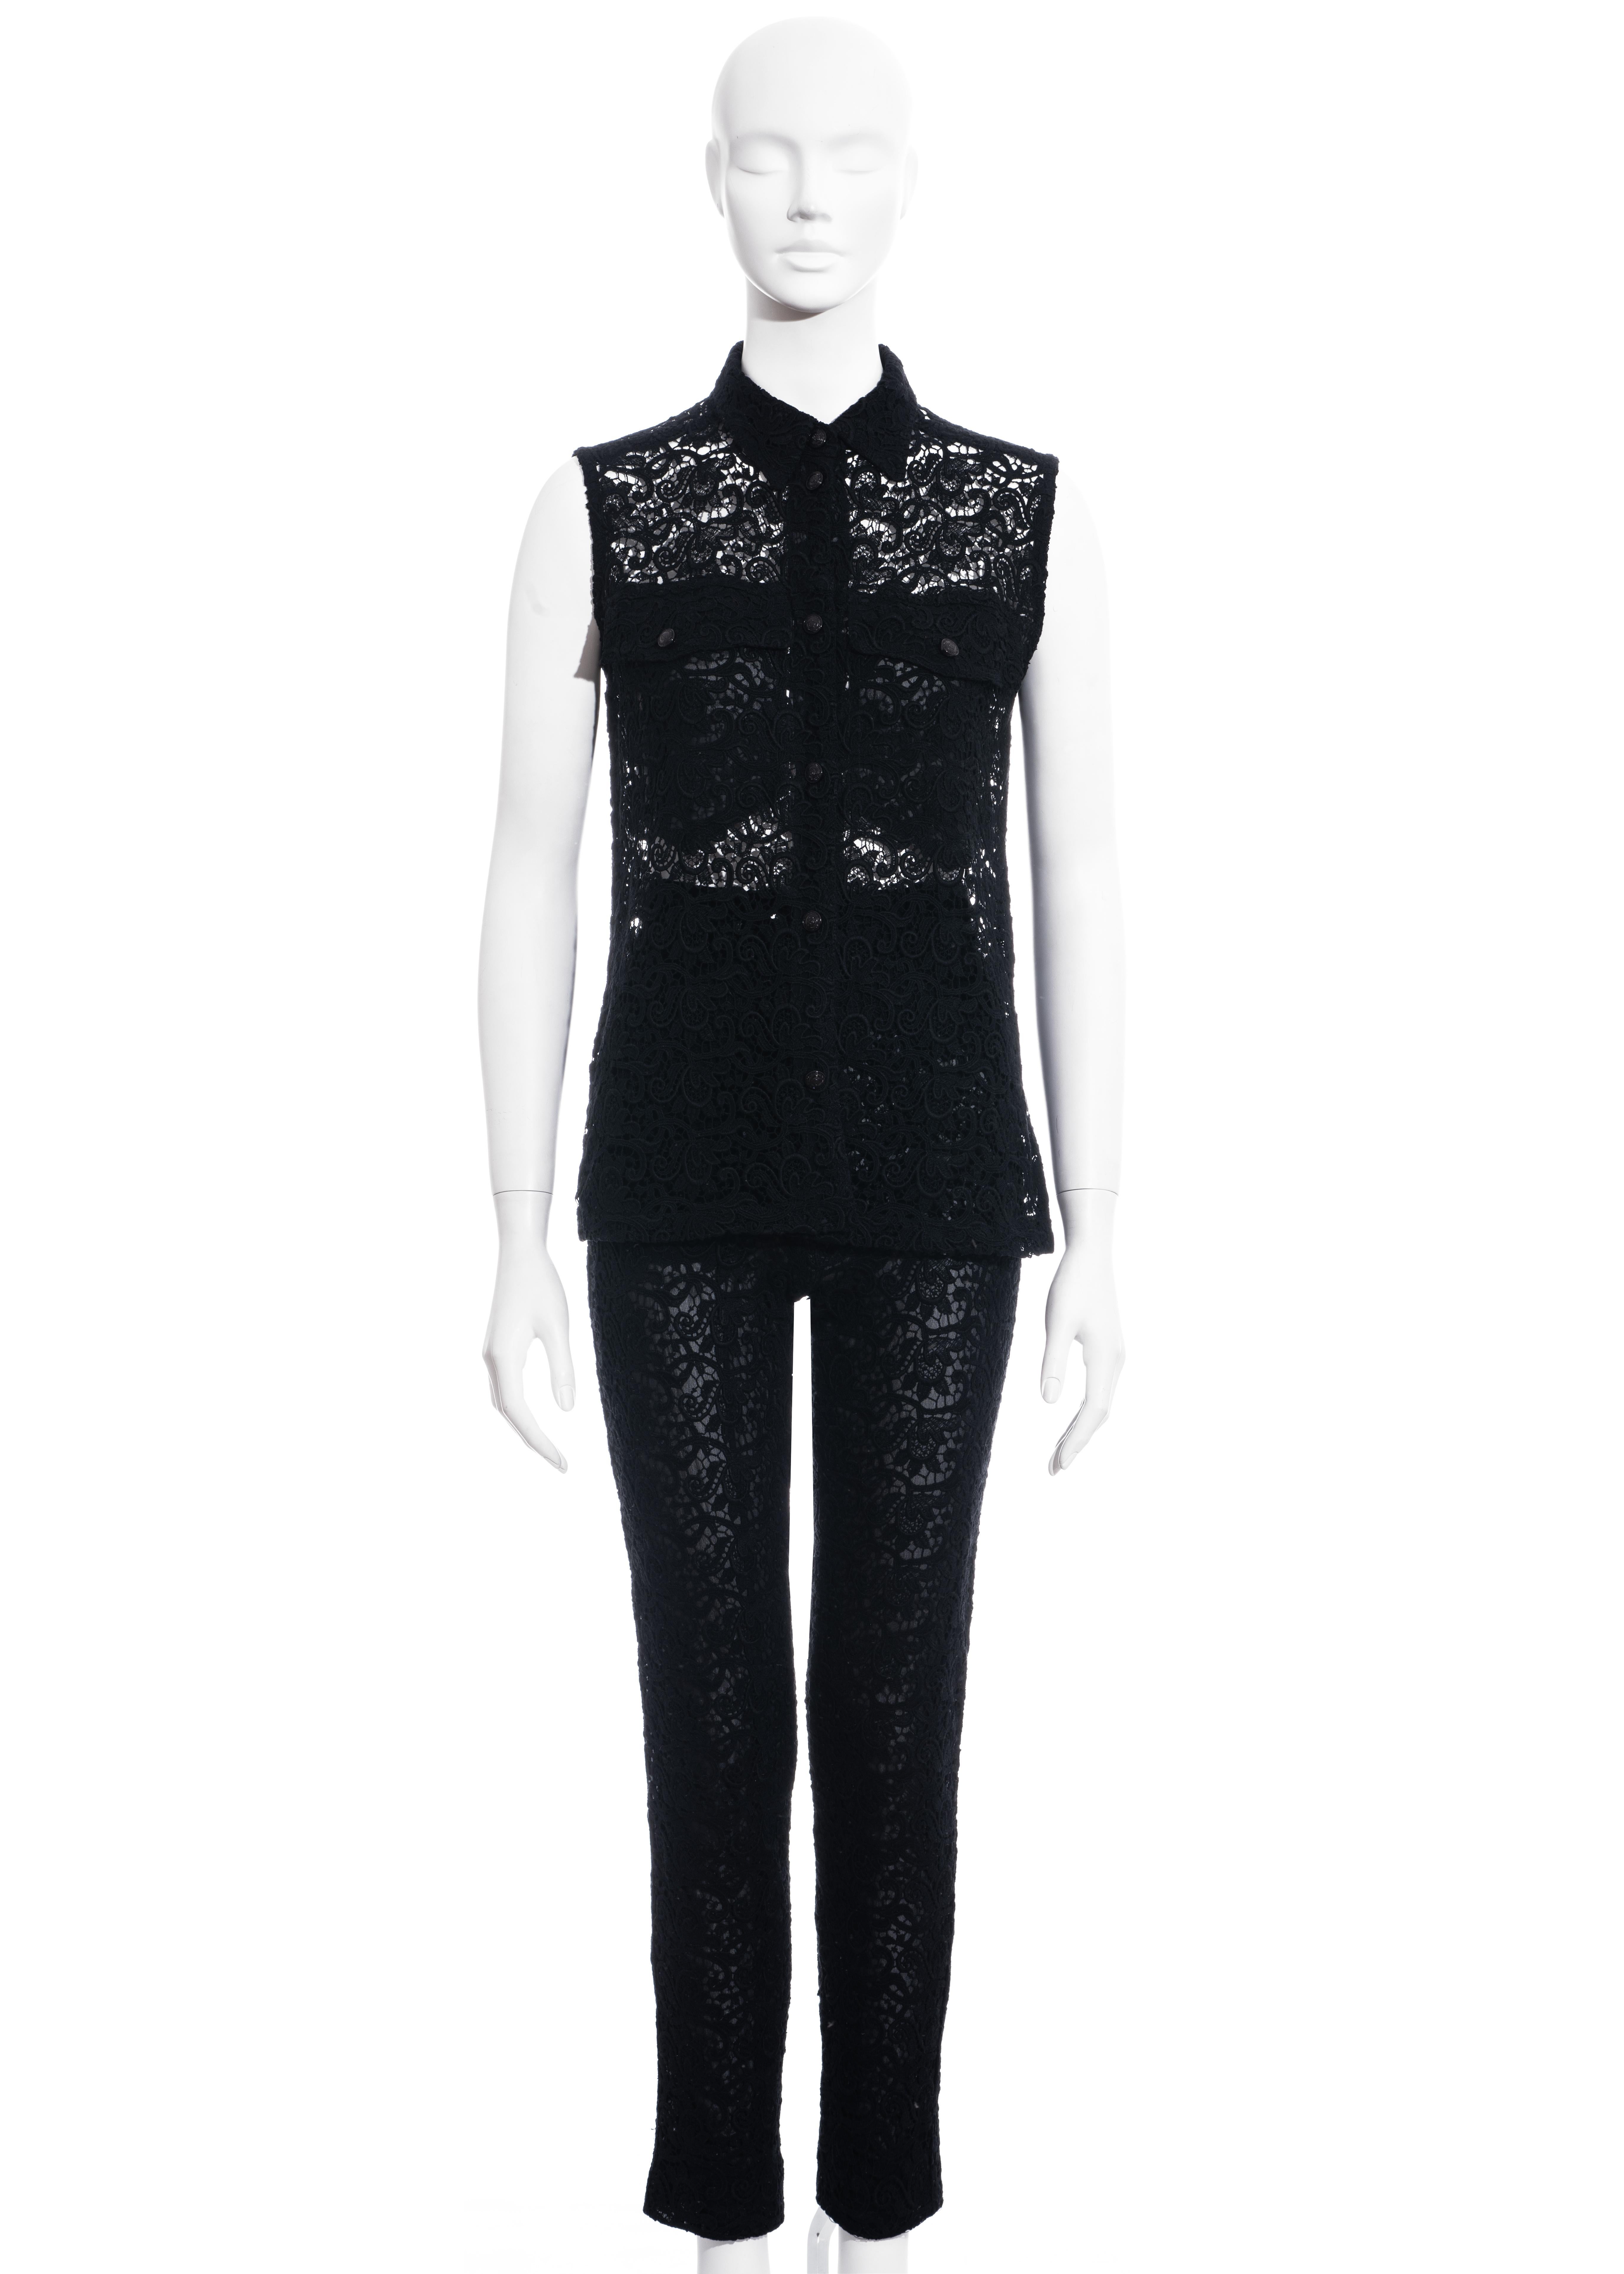 ▪ Gianni Versace black cotton lace pant suit
▪ Sleeveless button up vest
▪ Two front flap patch pockets
▪ Slim pants with organza lining 
▪ IT 38 - FR 34 - UK 6 - US 2
▪ Spring-Summer 1994